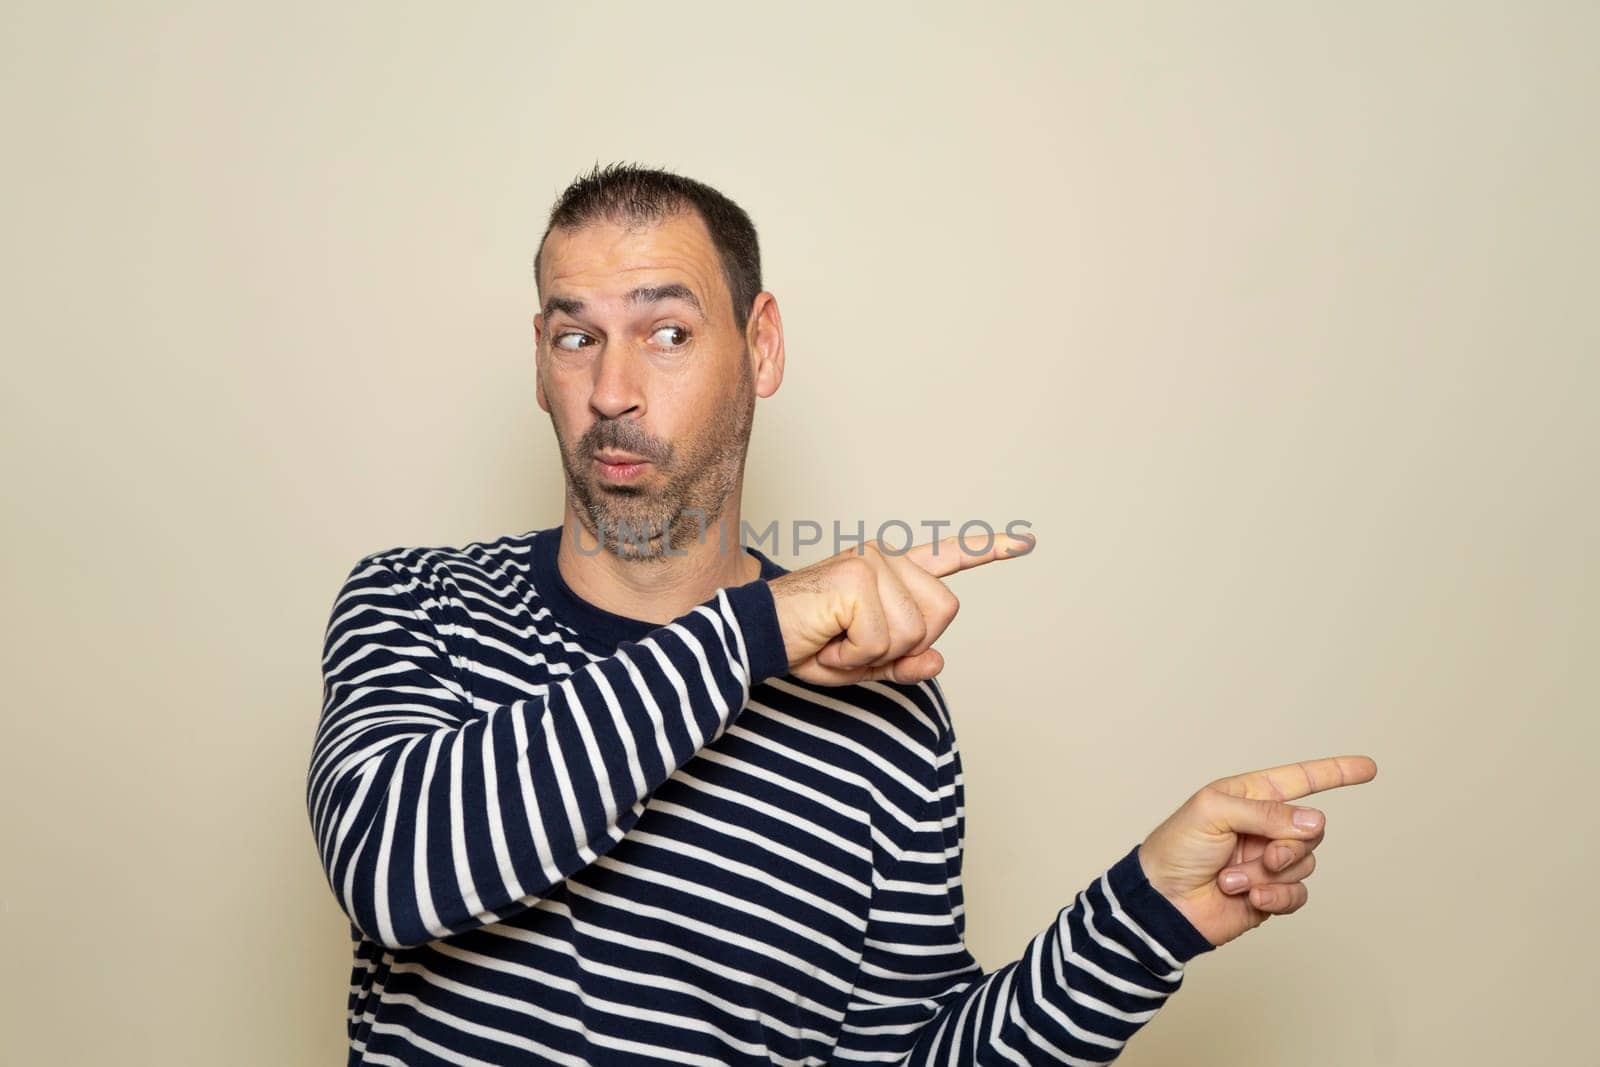 Bearded Hispanic man in his 40s wearing a striped sweater pointing to the side with his index fingers with an expression of surprise. Isolated on beige background